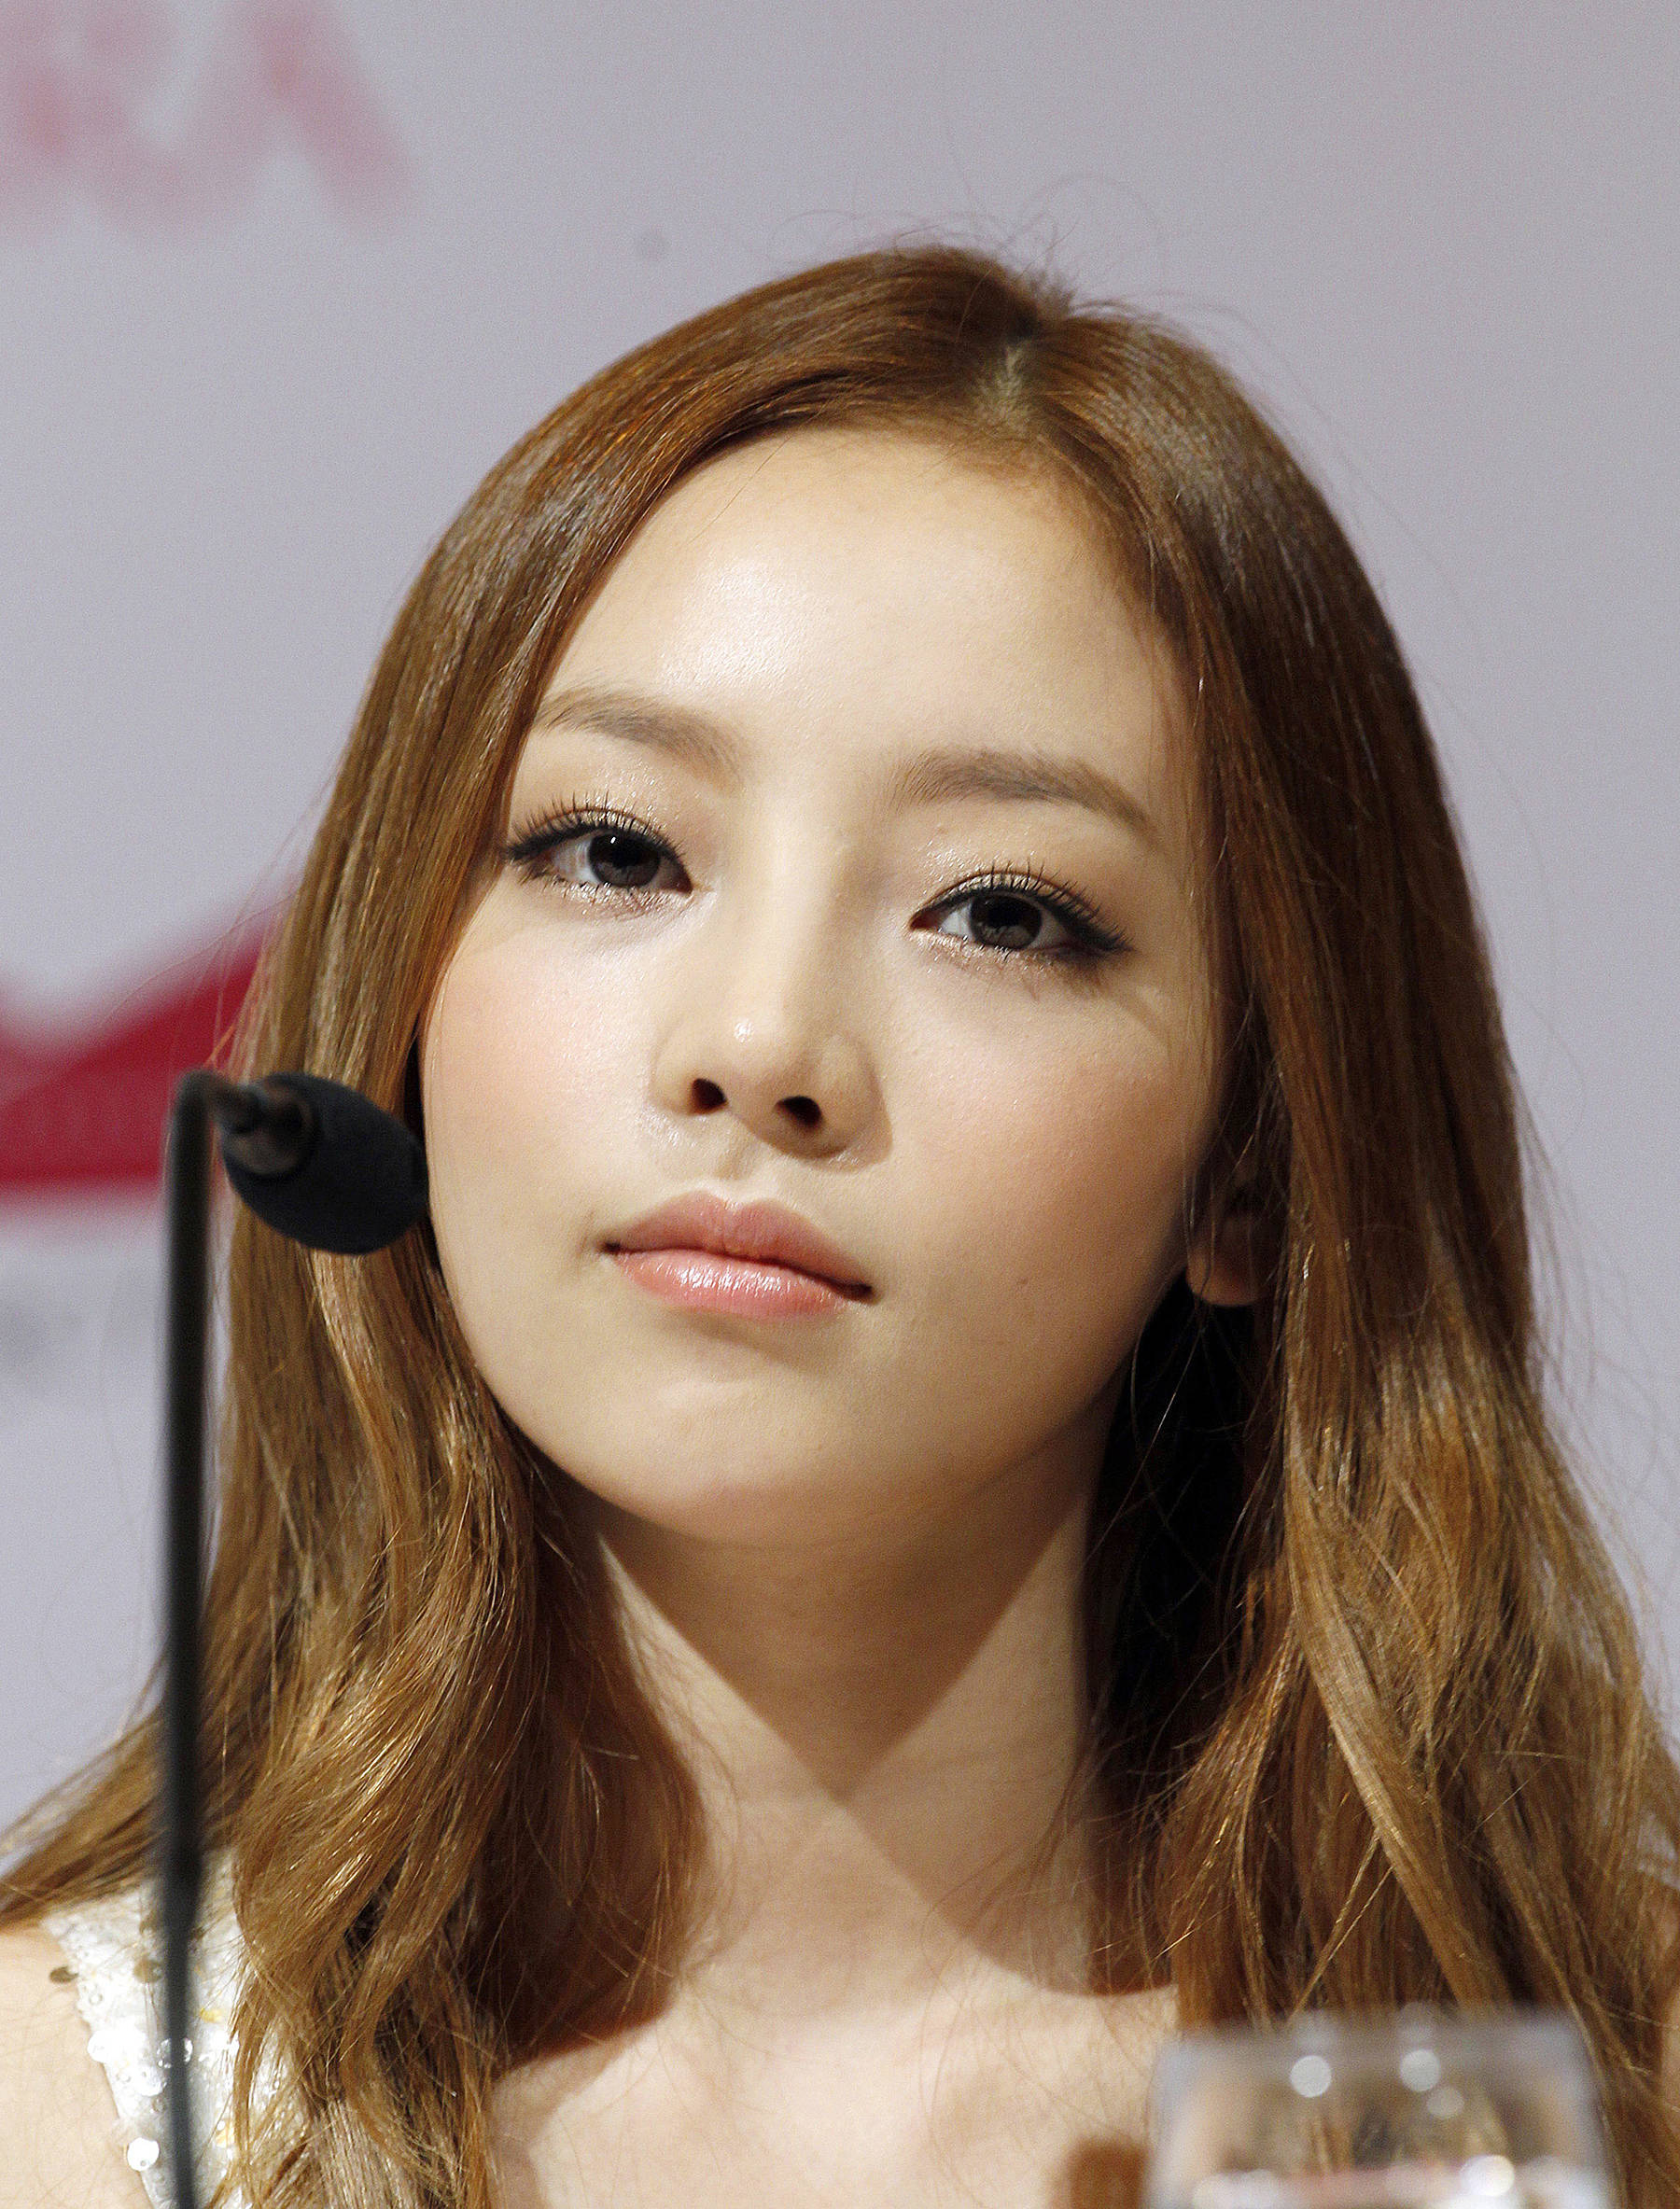 Associated Press                                South Korean pop star Goo Hara, seen here in 2012, was found dead at her home in Seoul on Sunday. She was 28.